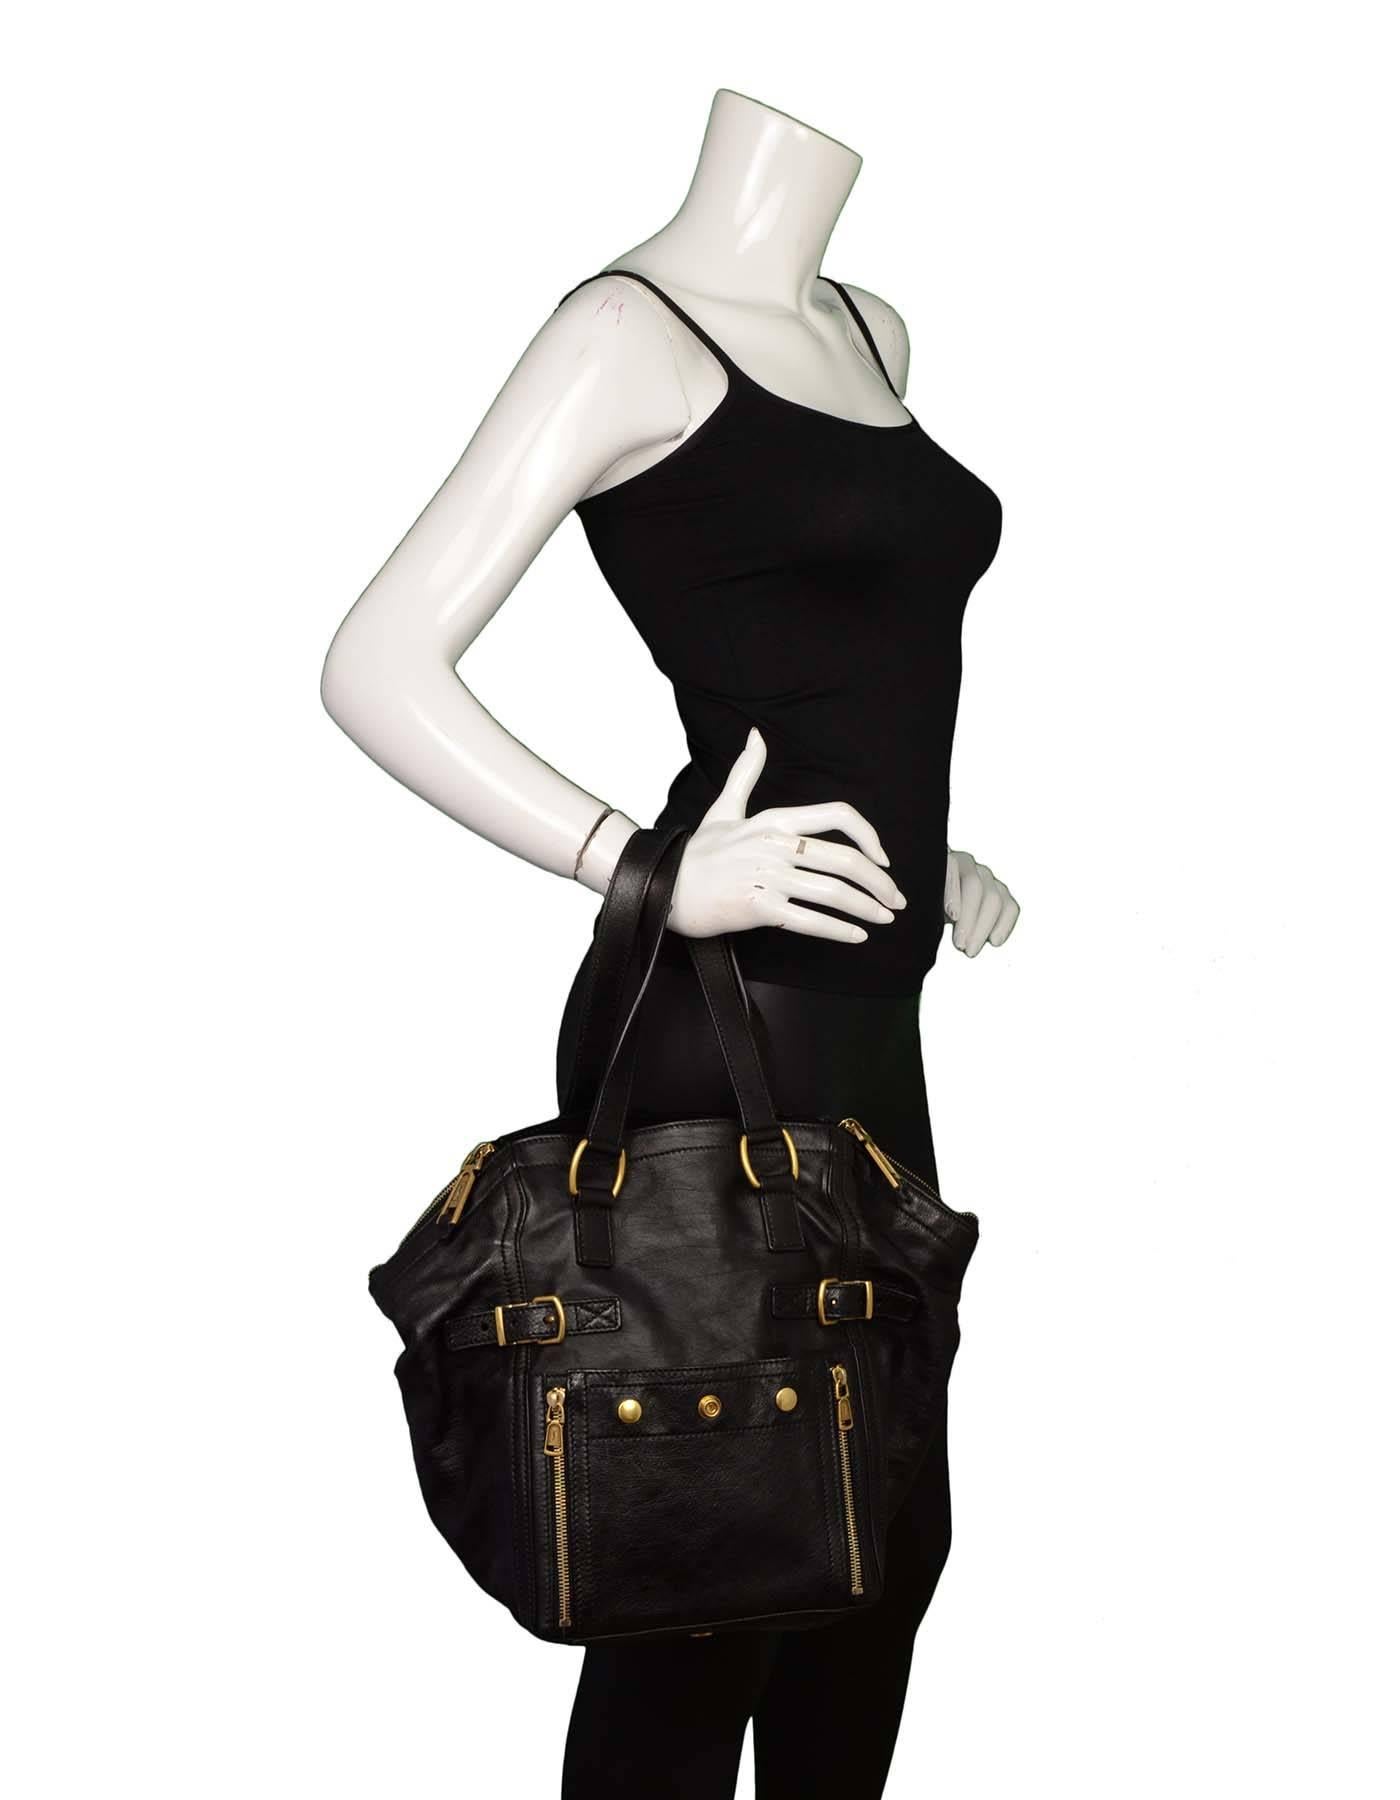 Yves Saint Laurent Black Leather Small Downtown Tote

Made In: Italy
Color: Black
Hardware: Goldtone
Materials: Leather and metal
Lining: Black textile
Closure/Opening: Zip closure at sides and open in middle
Exterior Pockets: One front